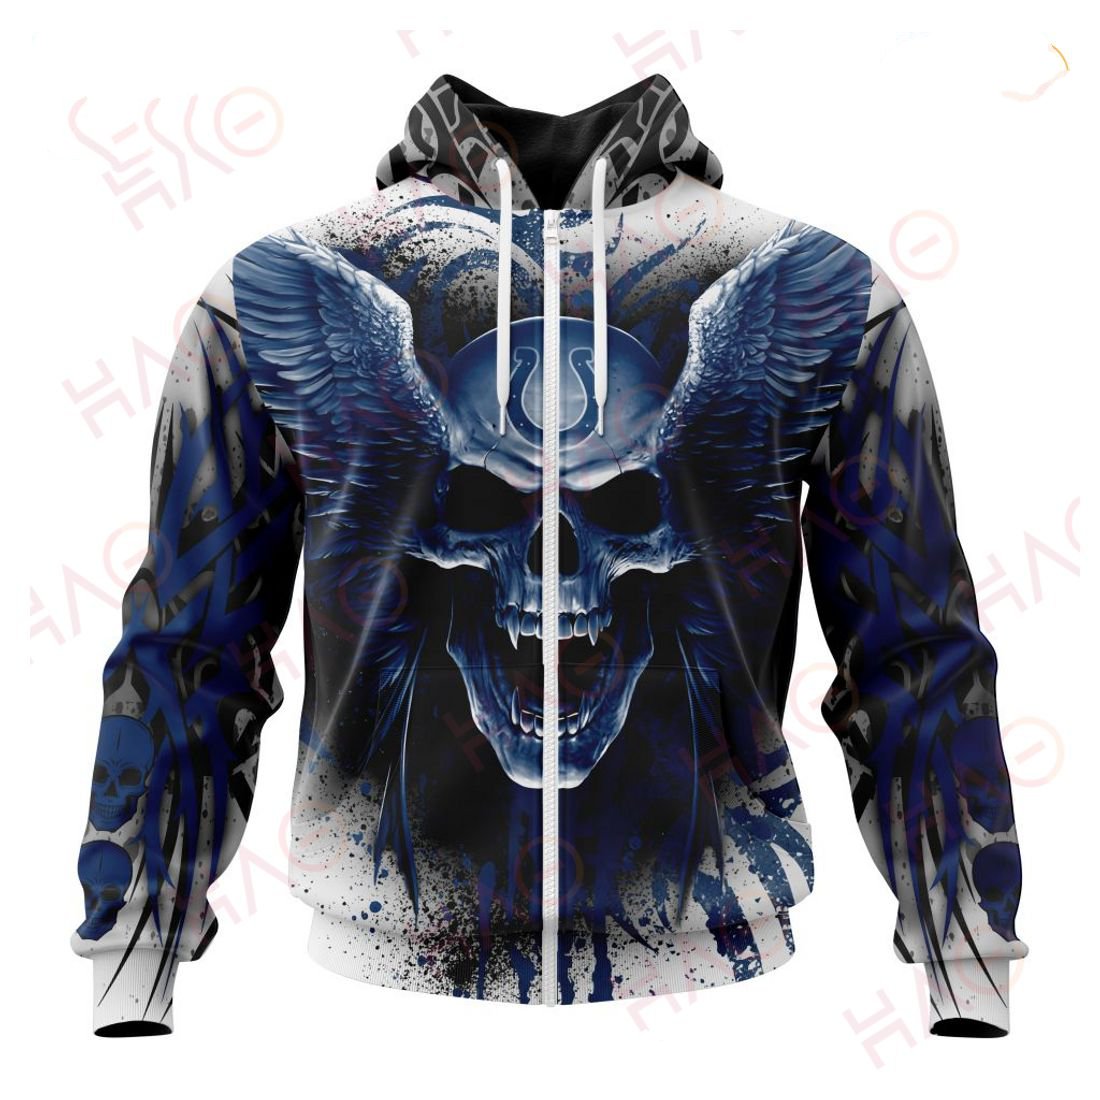 INDIANAPOLIS COLTS 3D HOODIE SKULL ART